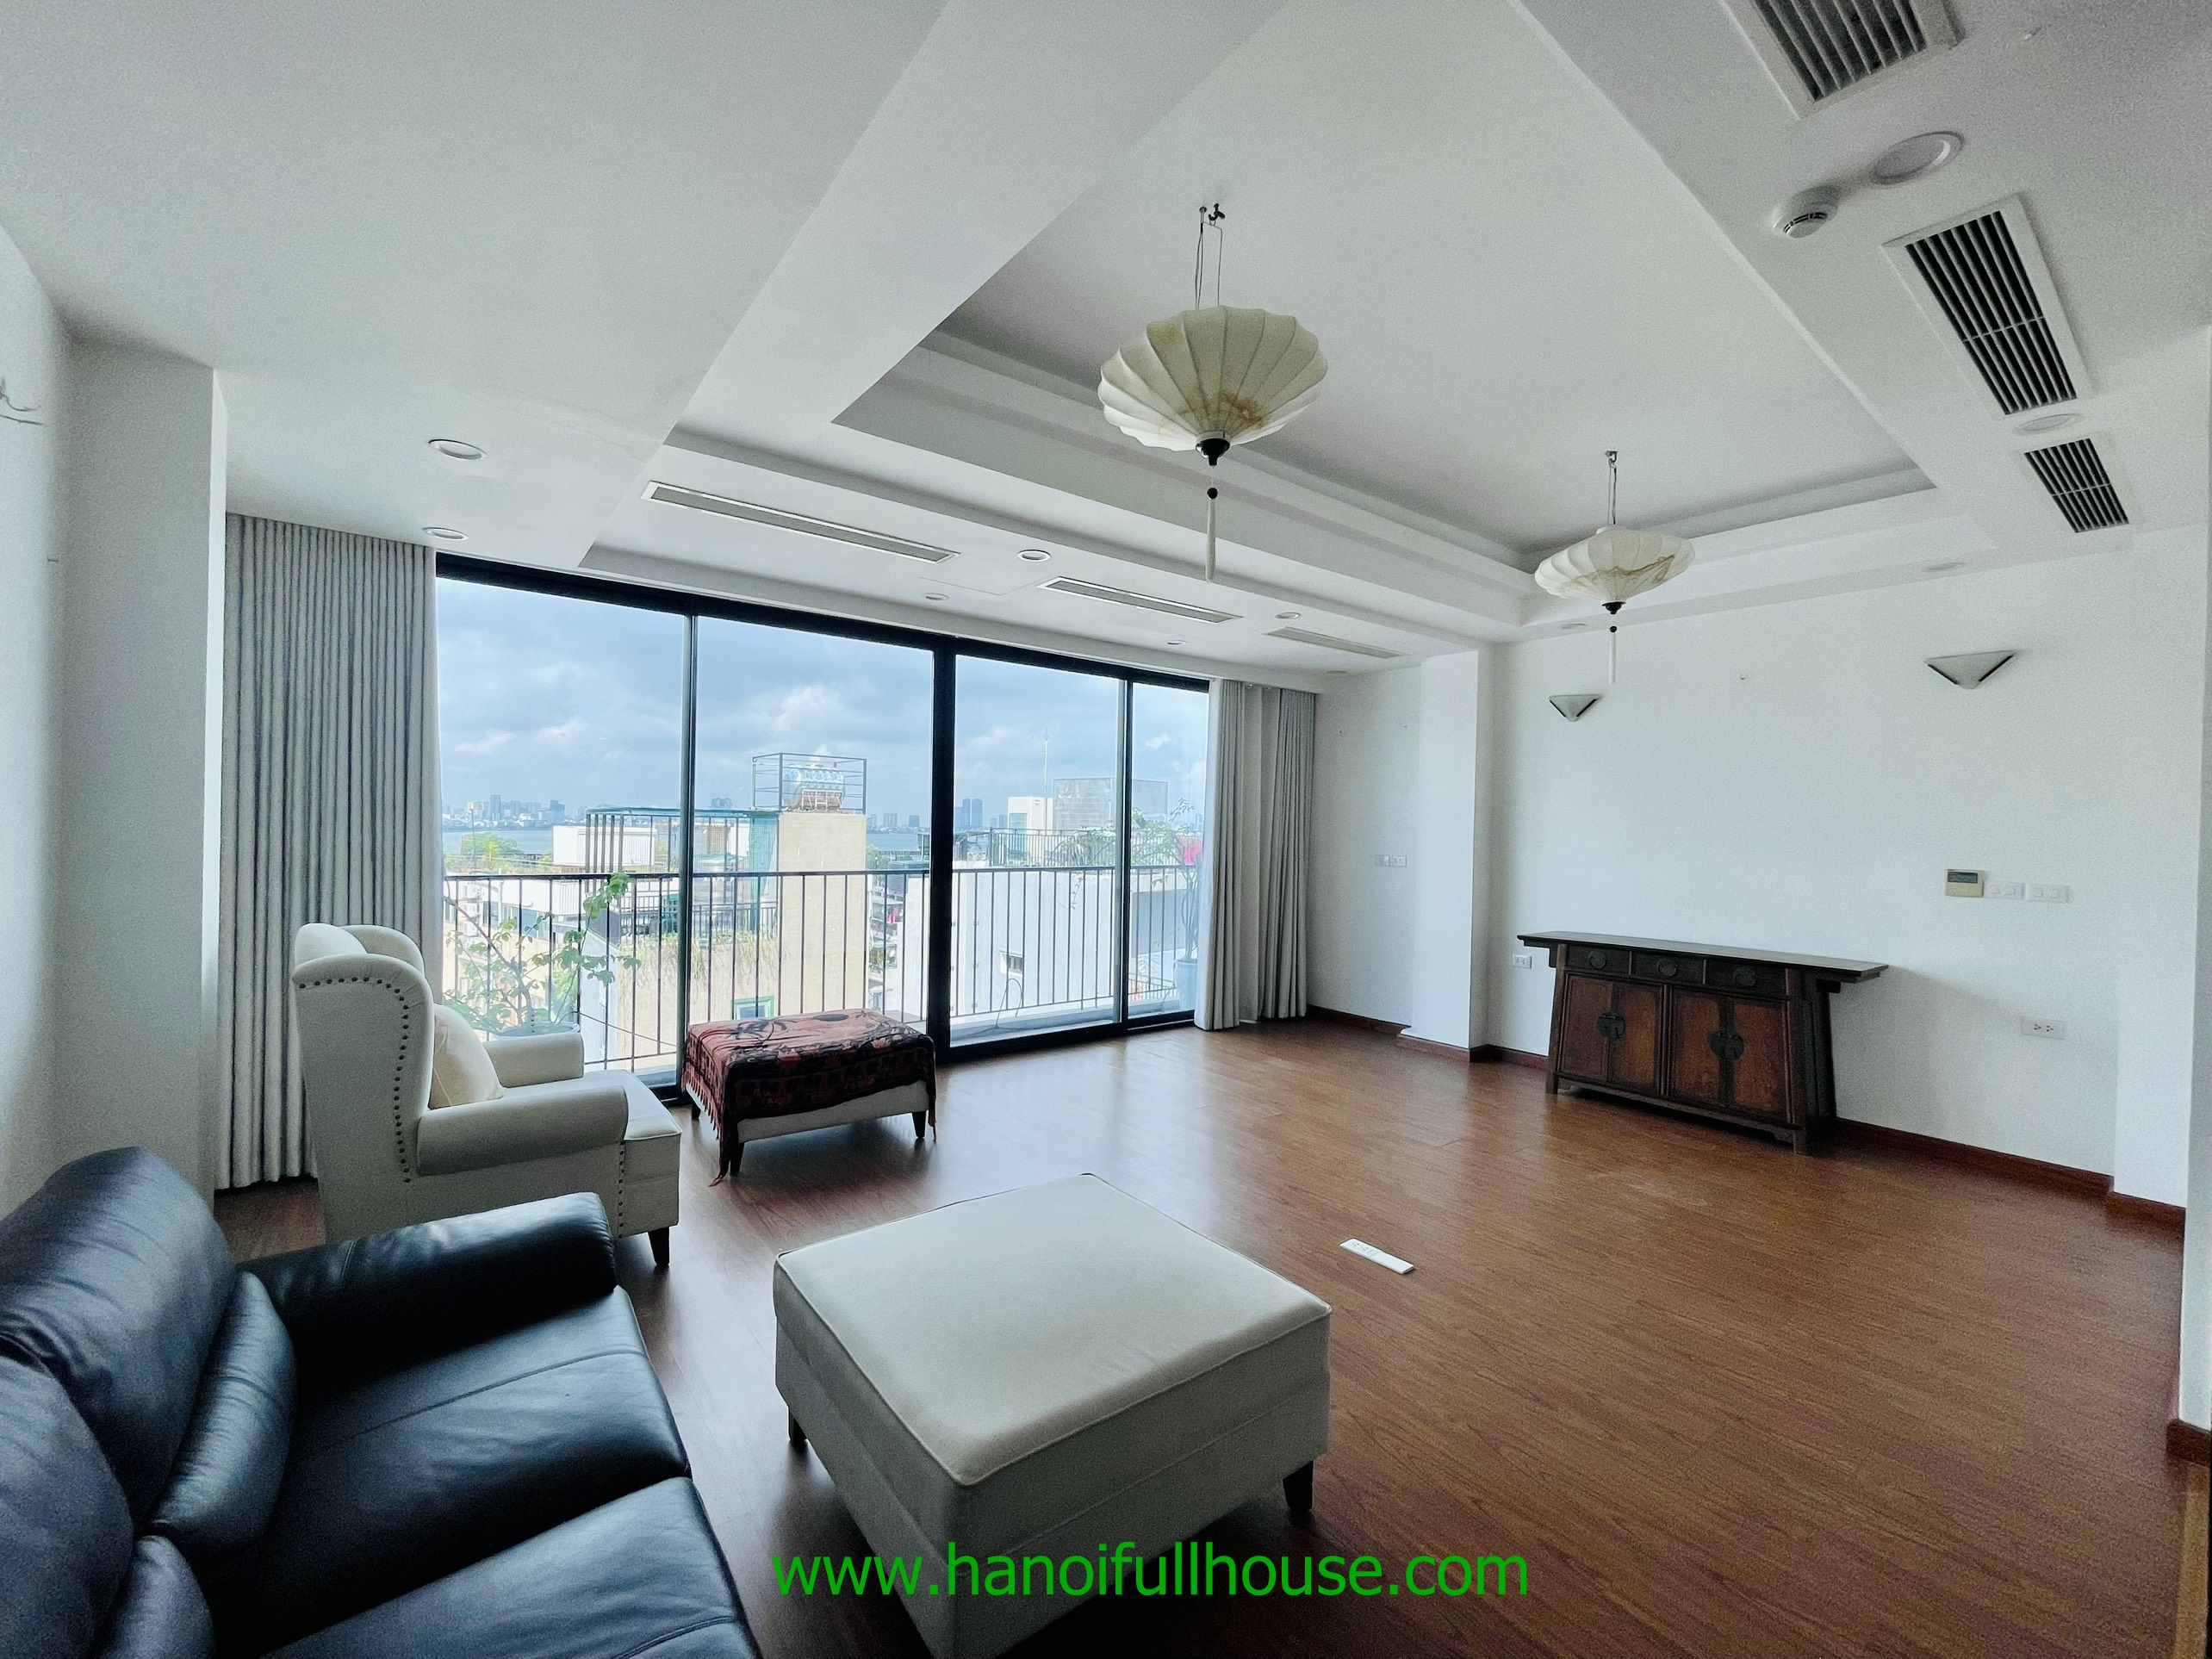 3 bedroom apartment, fully furnished in Hanoi center for lease